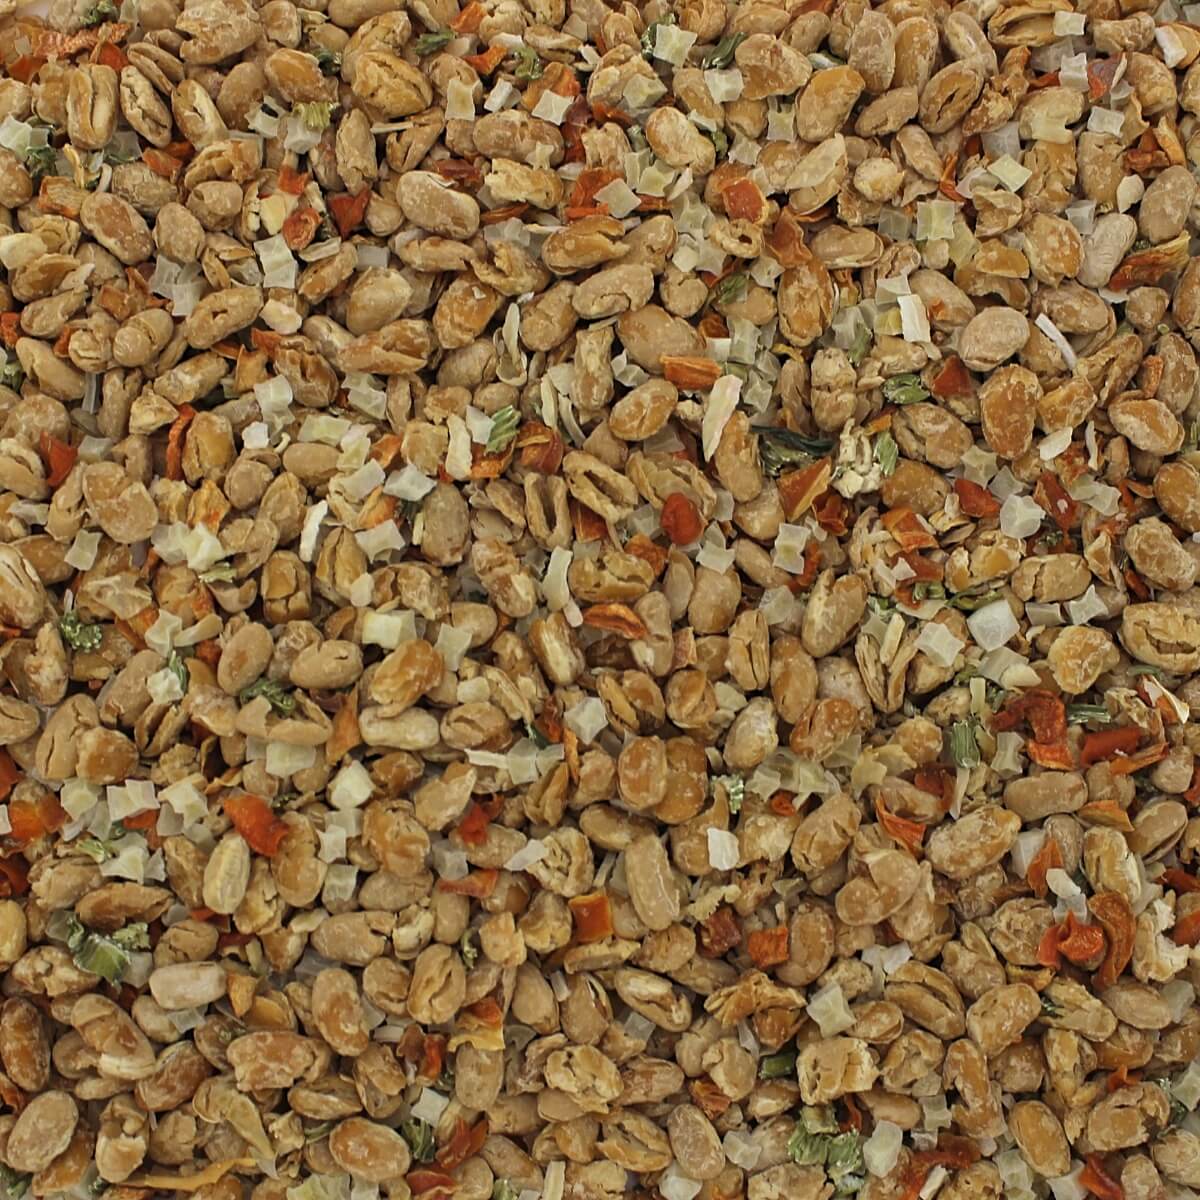 A close-up of a pile of nuts and seeds available from Harmony House Soup and Chili Mix Sampler (12 ct) - (SHIPS IN 1-2 WEEKS).